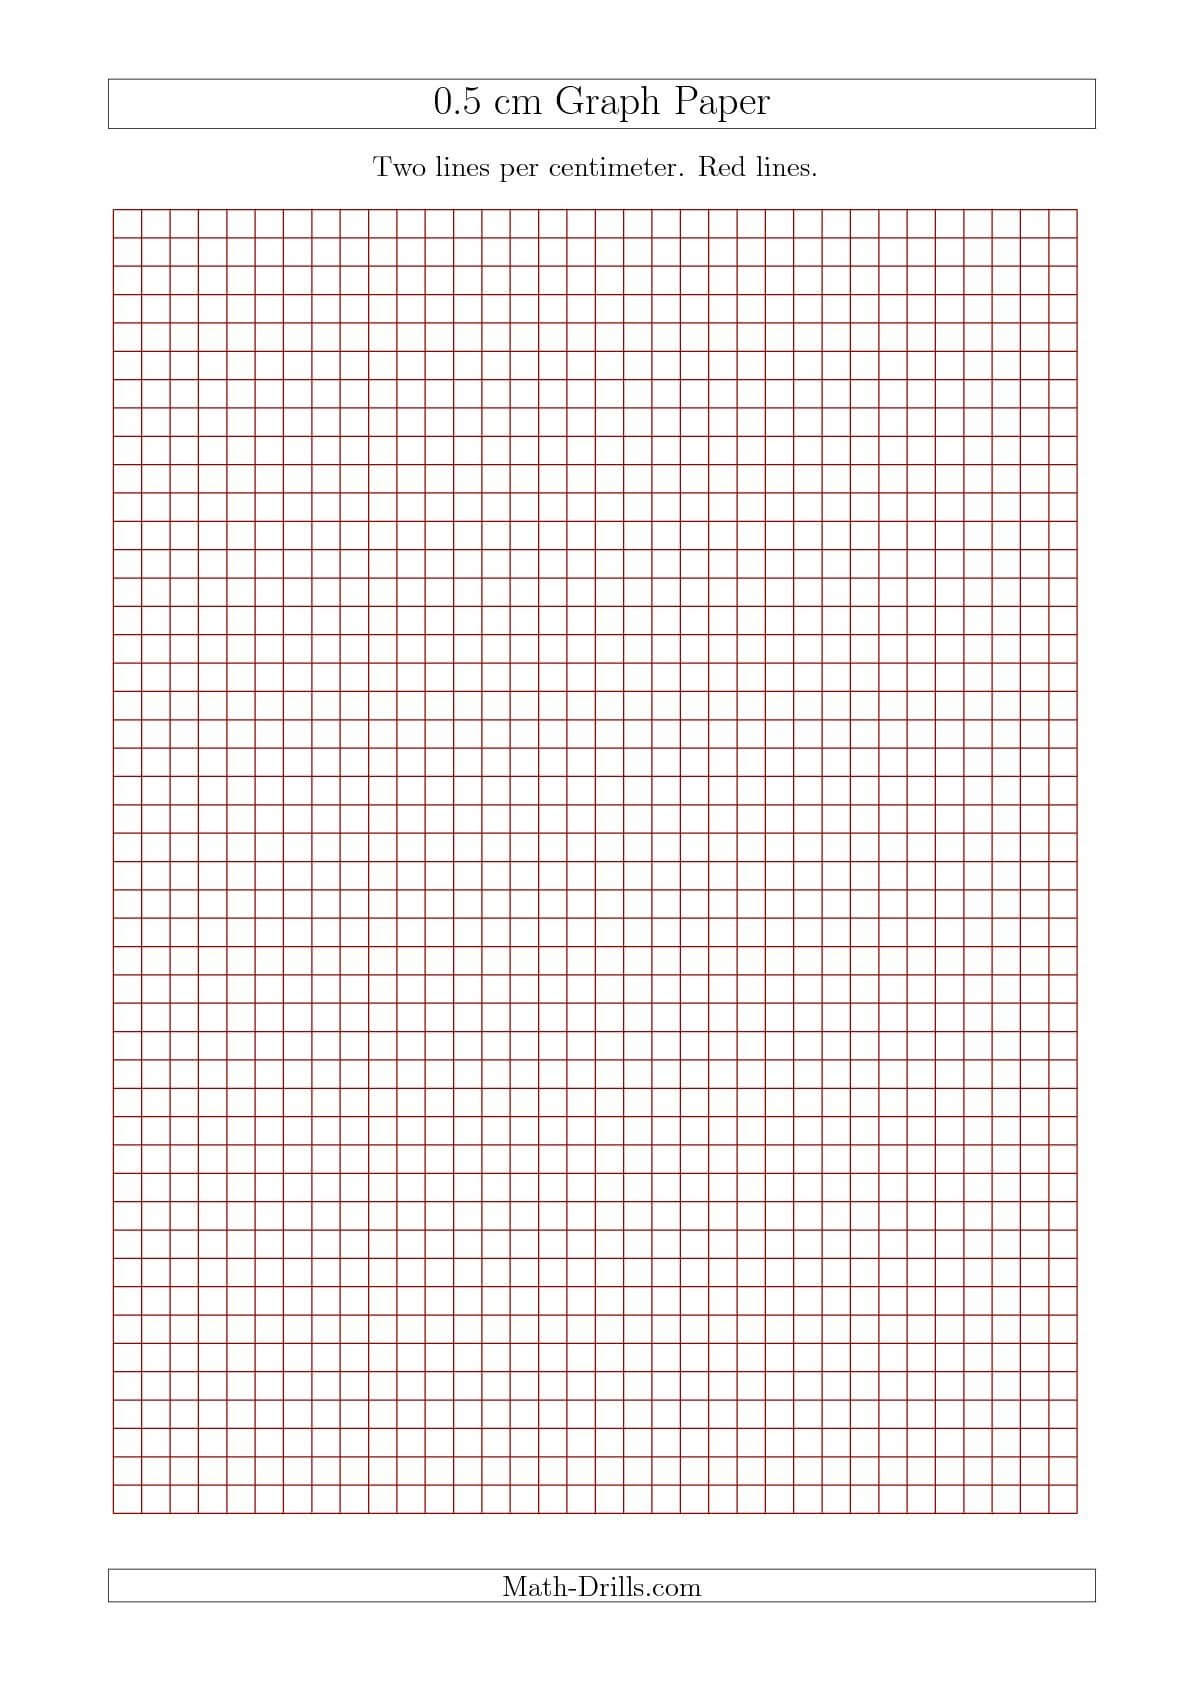 New 2015 09 17! 0.5 Cm Graph Paper With Red Lines (A4 Size Within 1 Cm Graph Paper Template Word